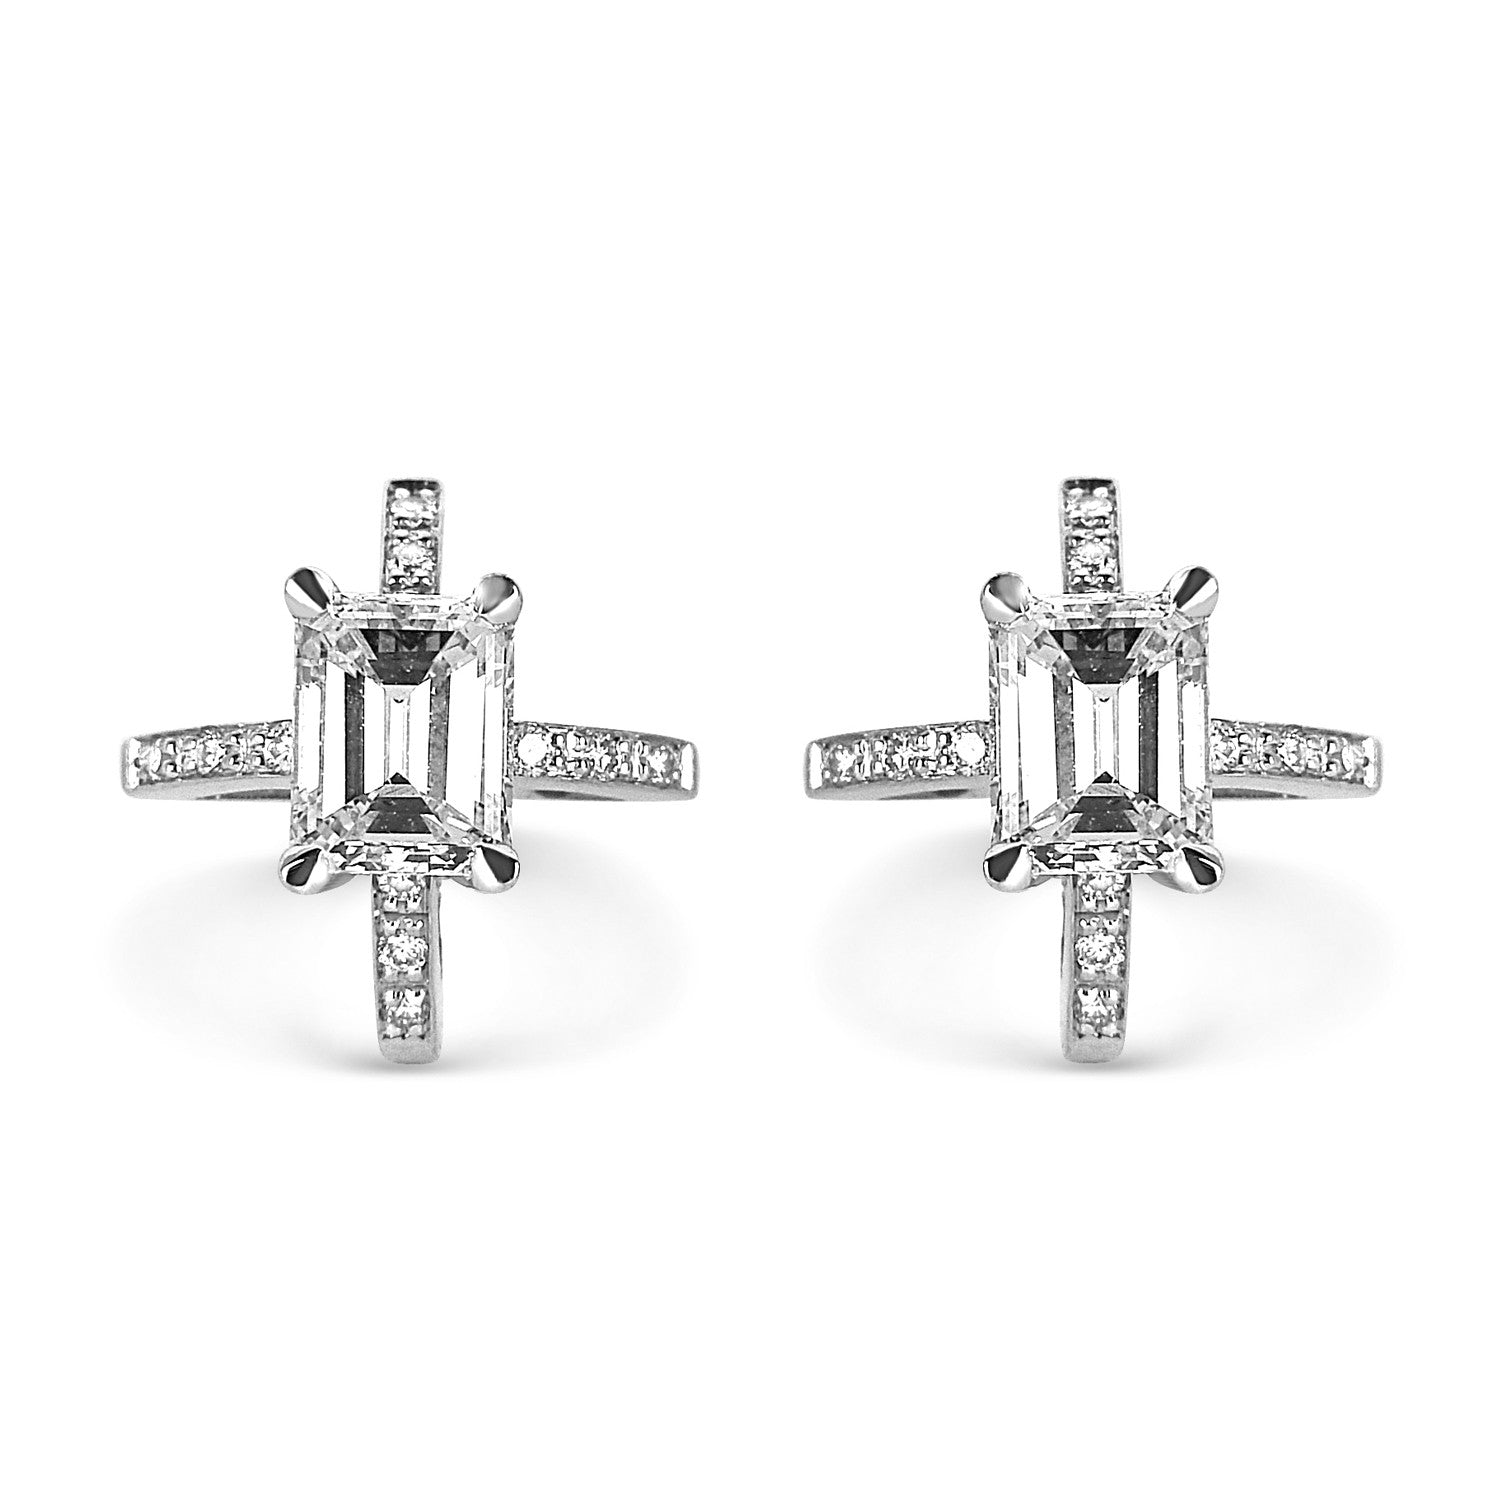 Bespoke Shairose earrings - 18ct white gold and client's own emerald-cut diamonds